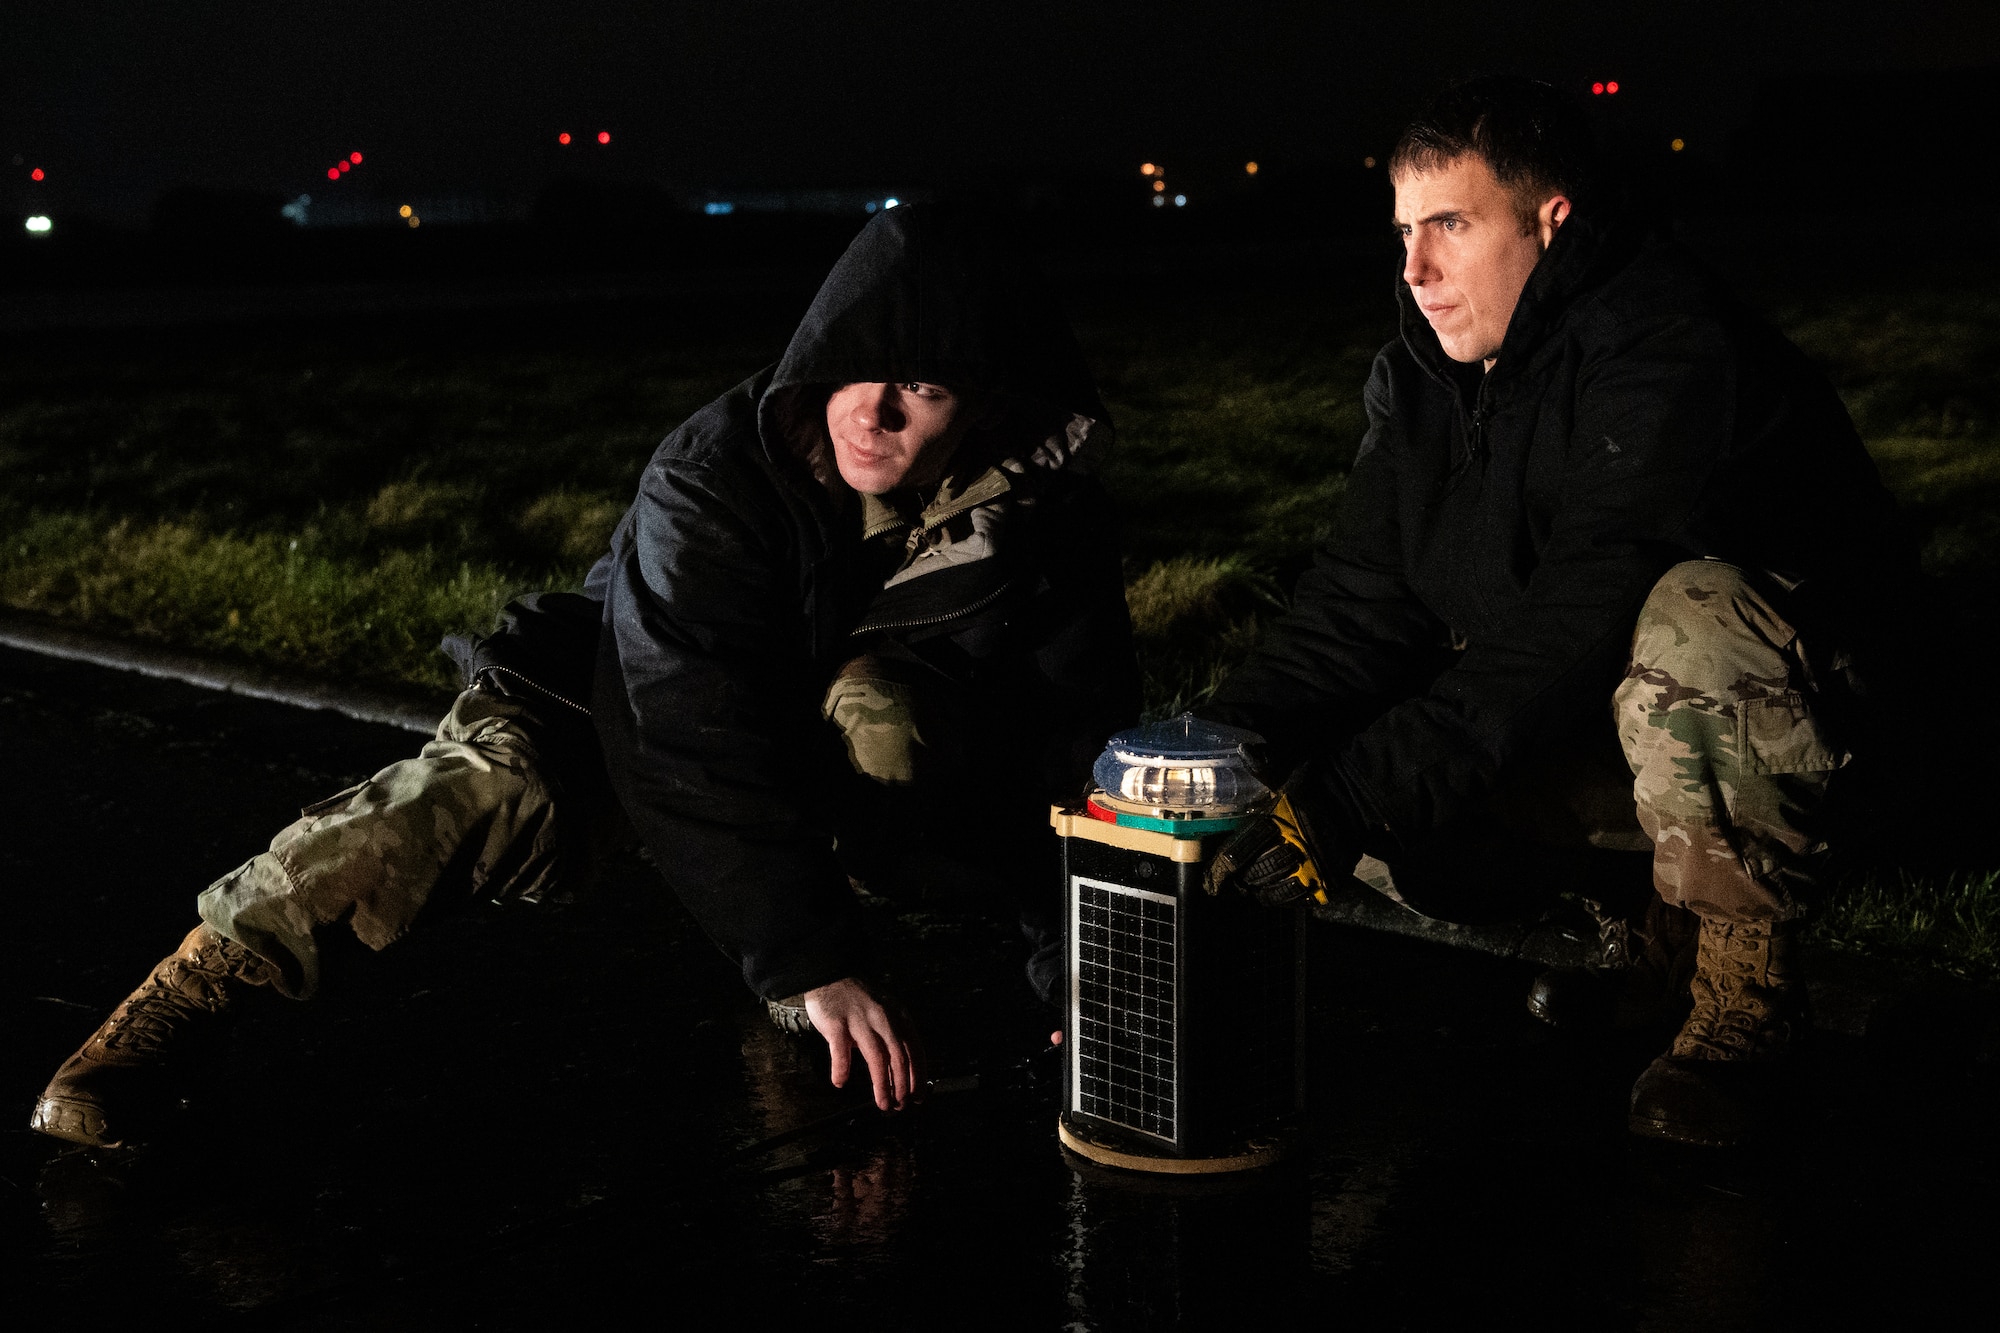 Two Airmen crouch down to shift a light on the ground at night